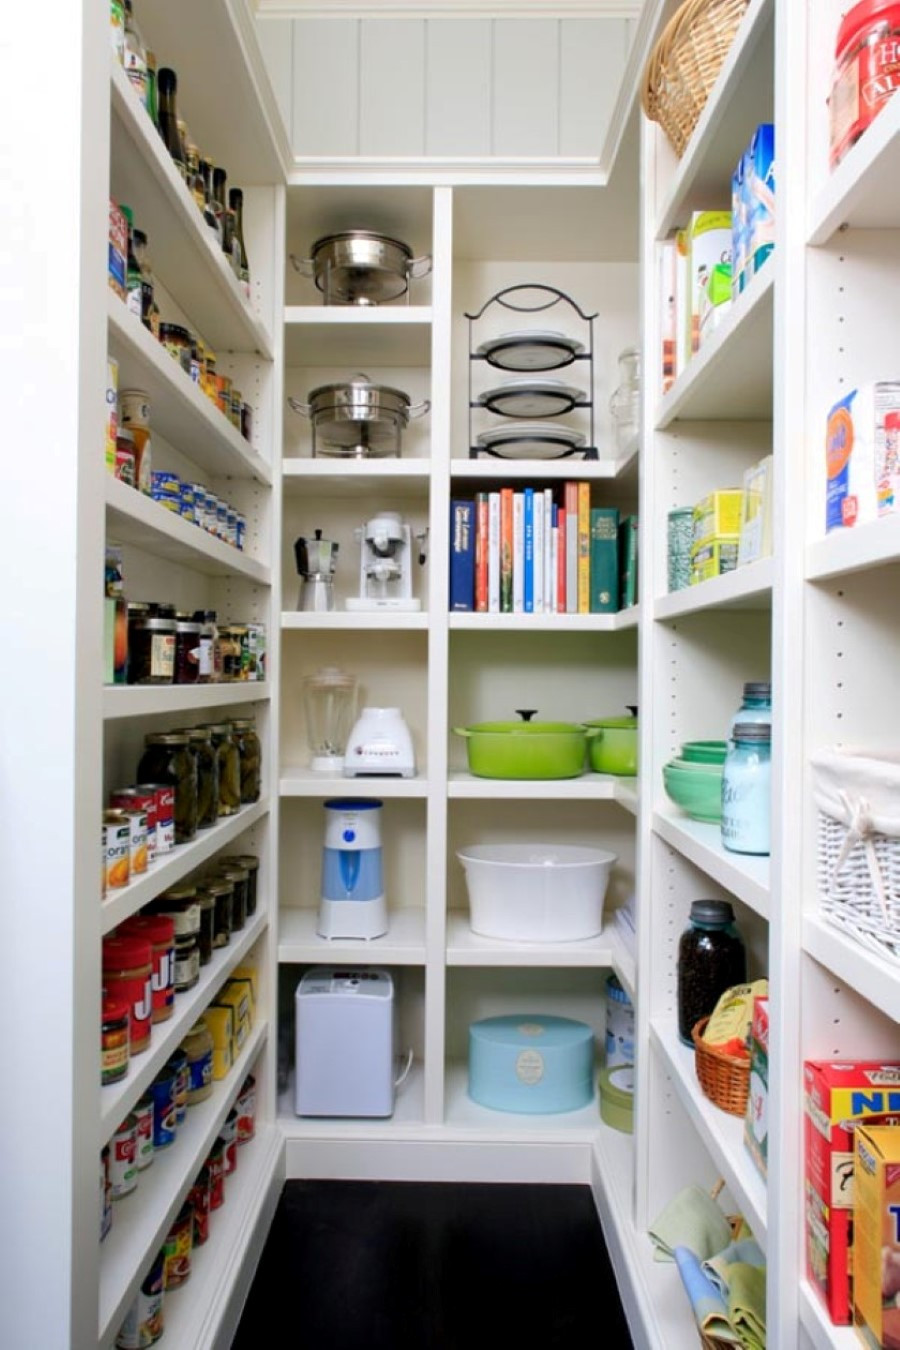 Pantry Ideas In Small Kitchen
 15 Kitchen Pantry Ideas With Form And Function